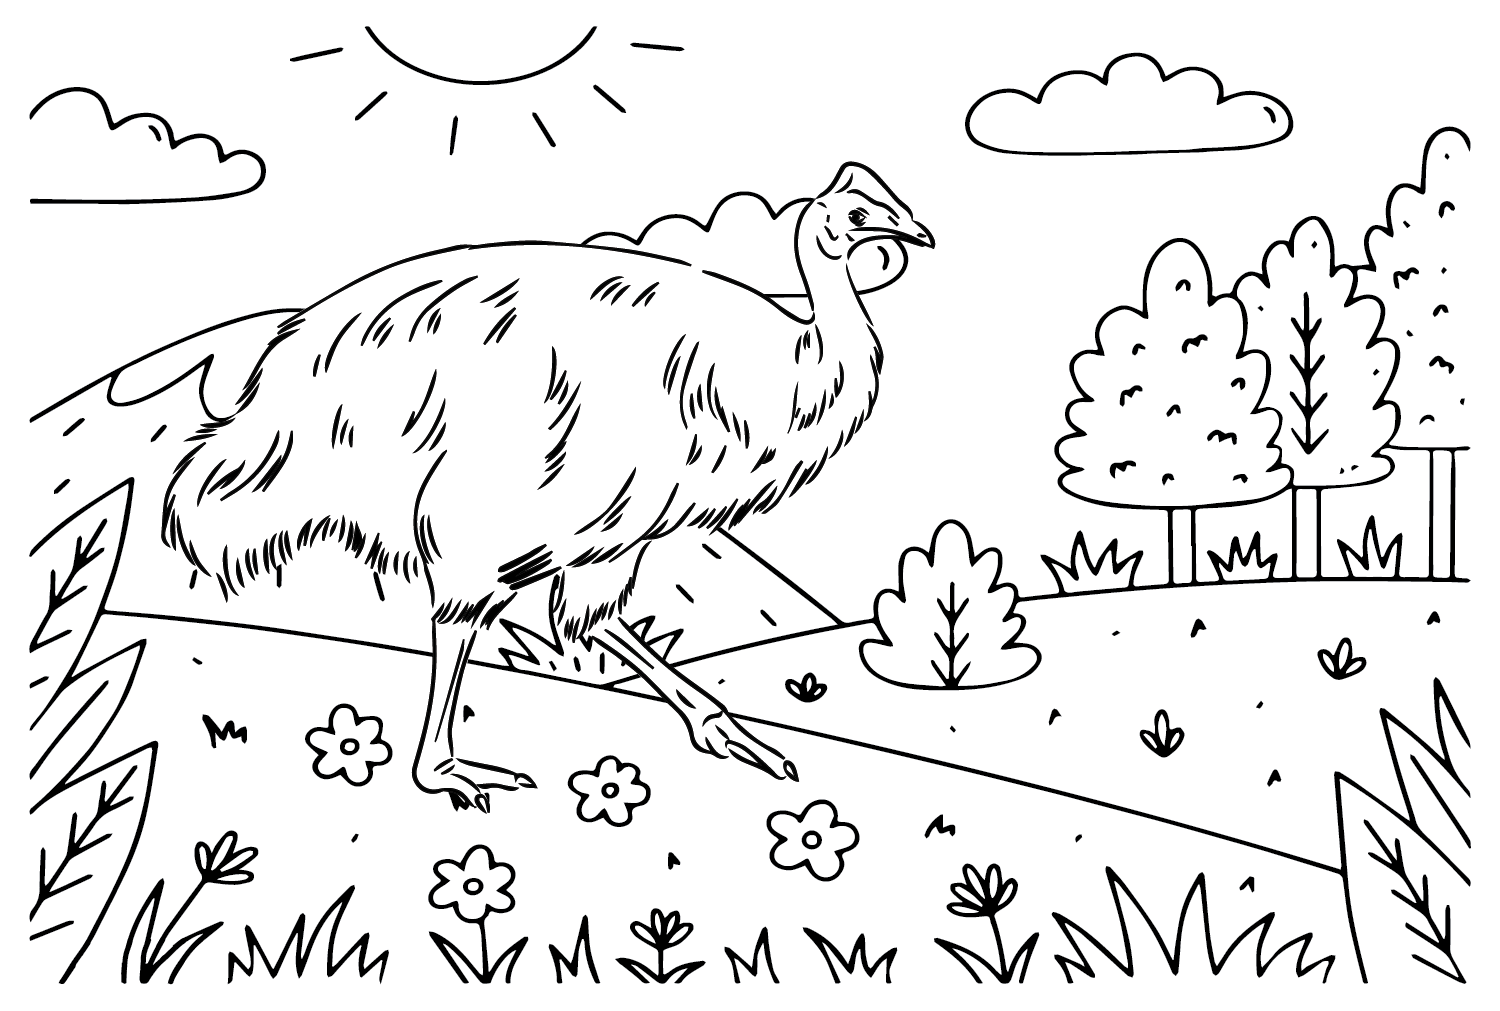 Free Cassowary Coloring Page from Cassowary